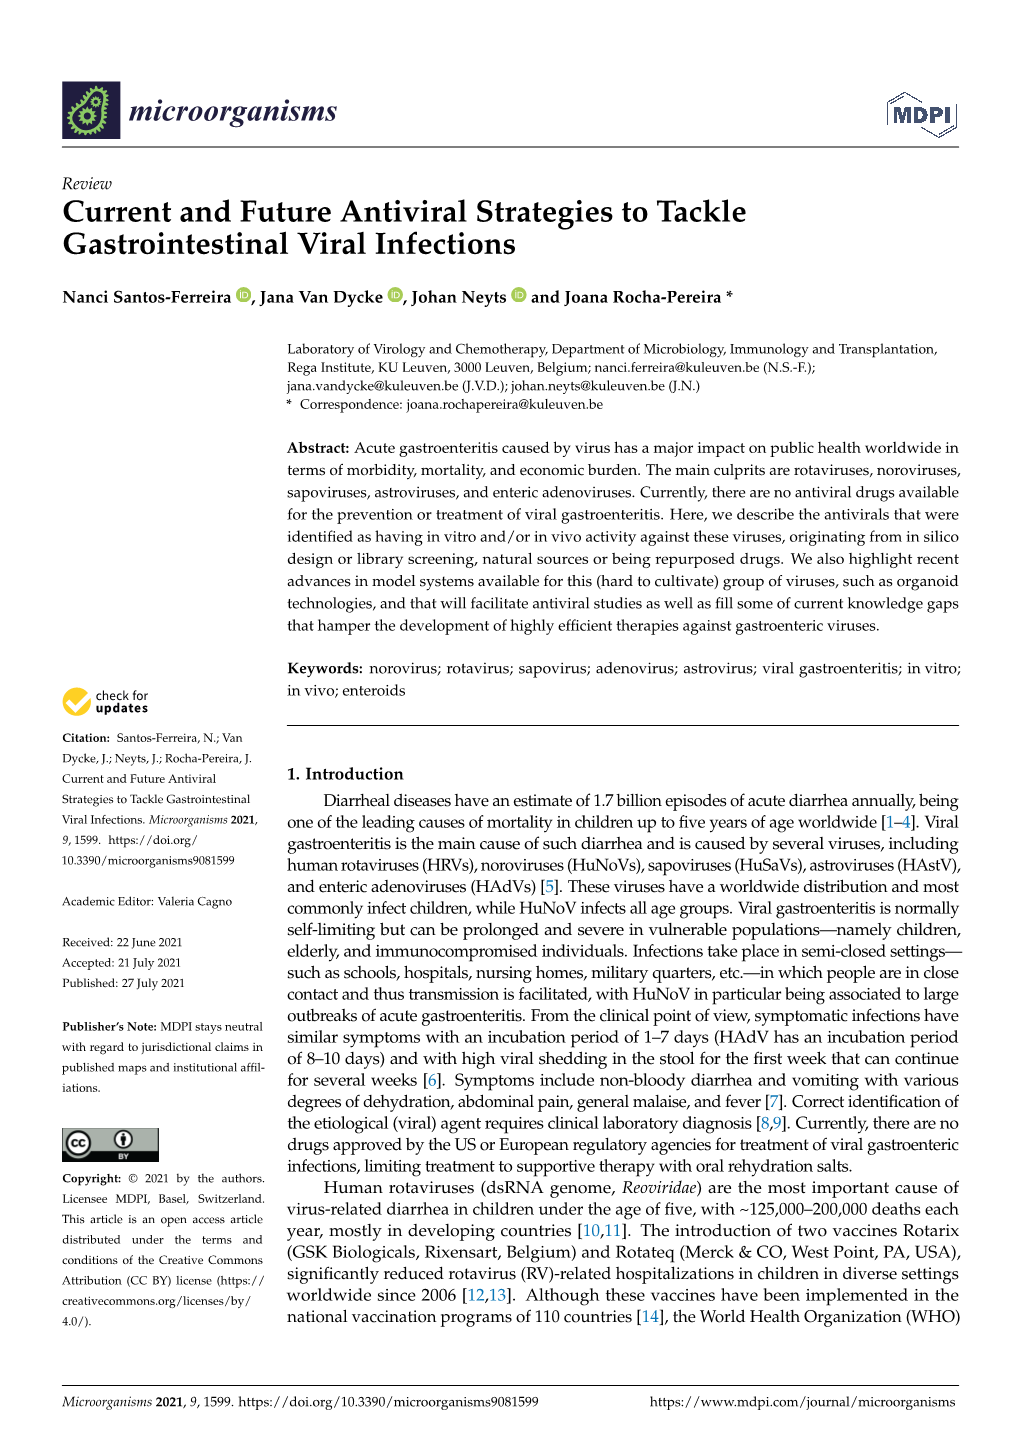 Current and Future Antiviral Strategies to Tackle Gastrointestinal Viral Infections